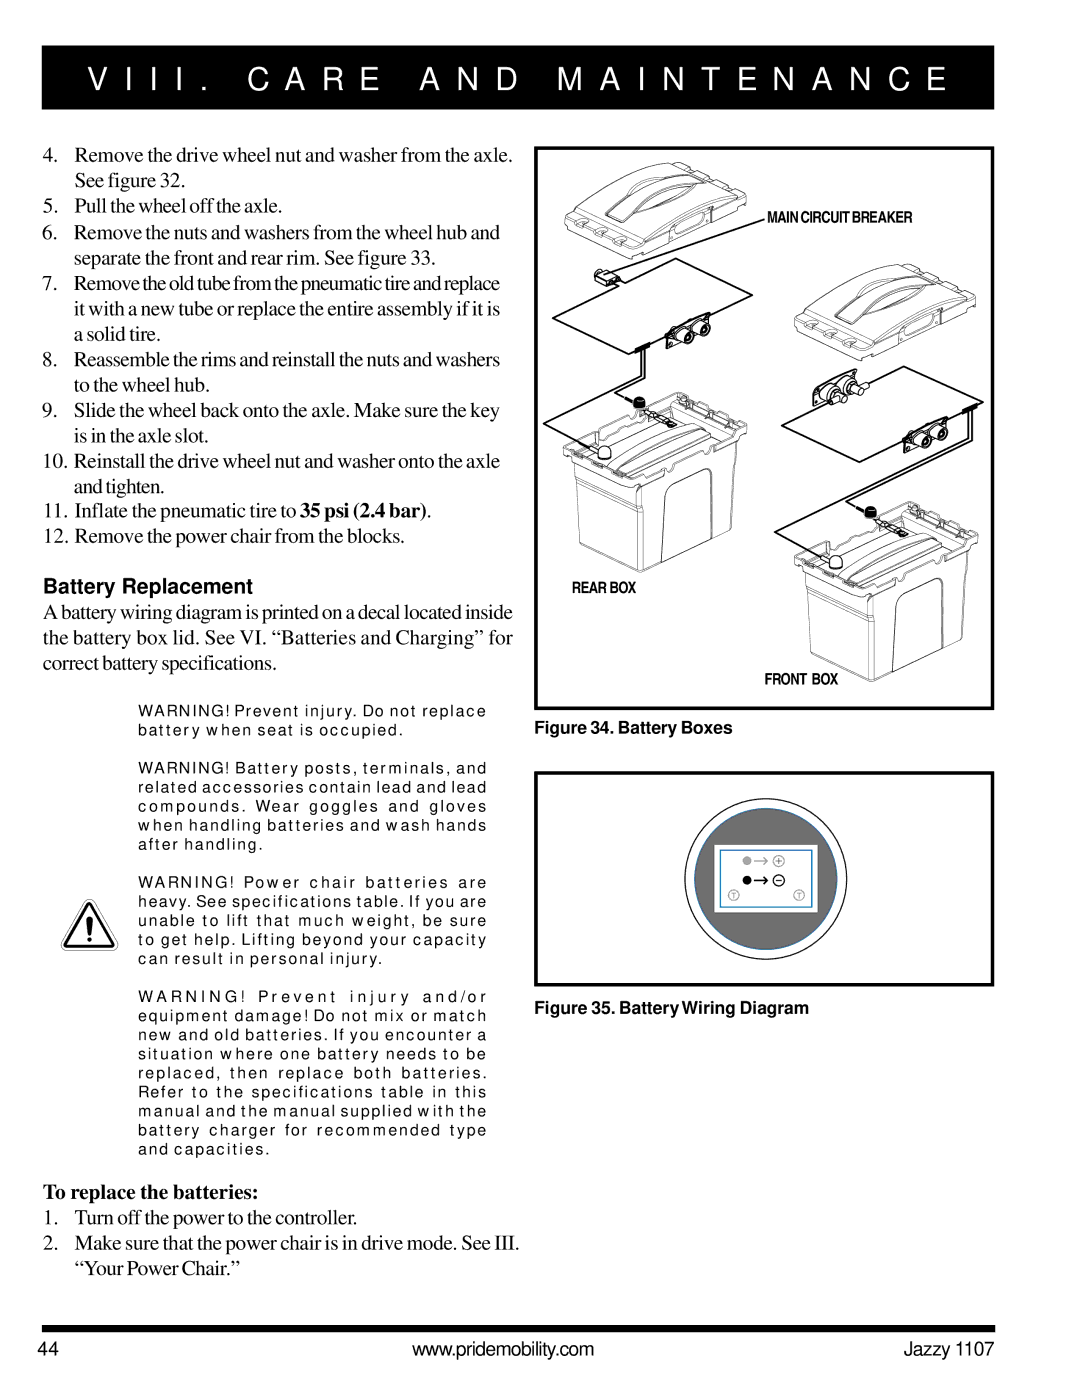 Pride Mobility 1107 owner manual I I . C a R E a N D, Battery Replacement, To replace the batteries 